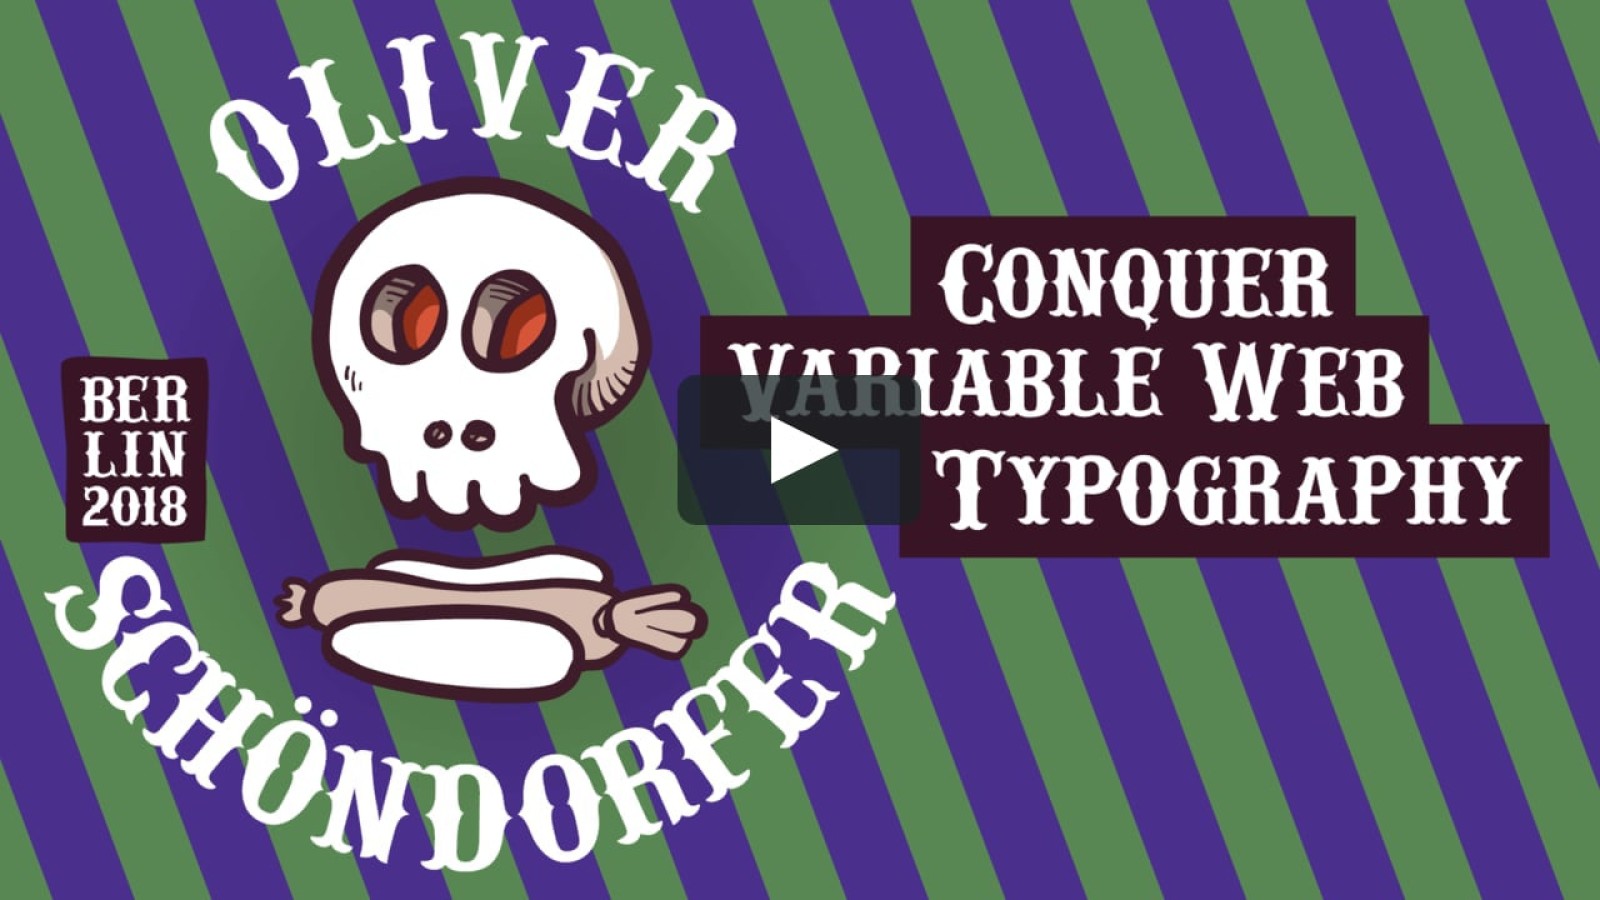 Conquer Variable Web Typography